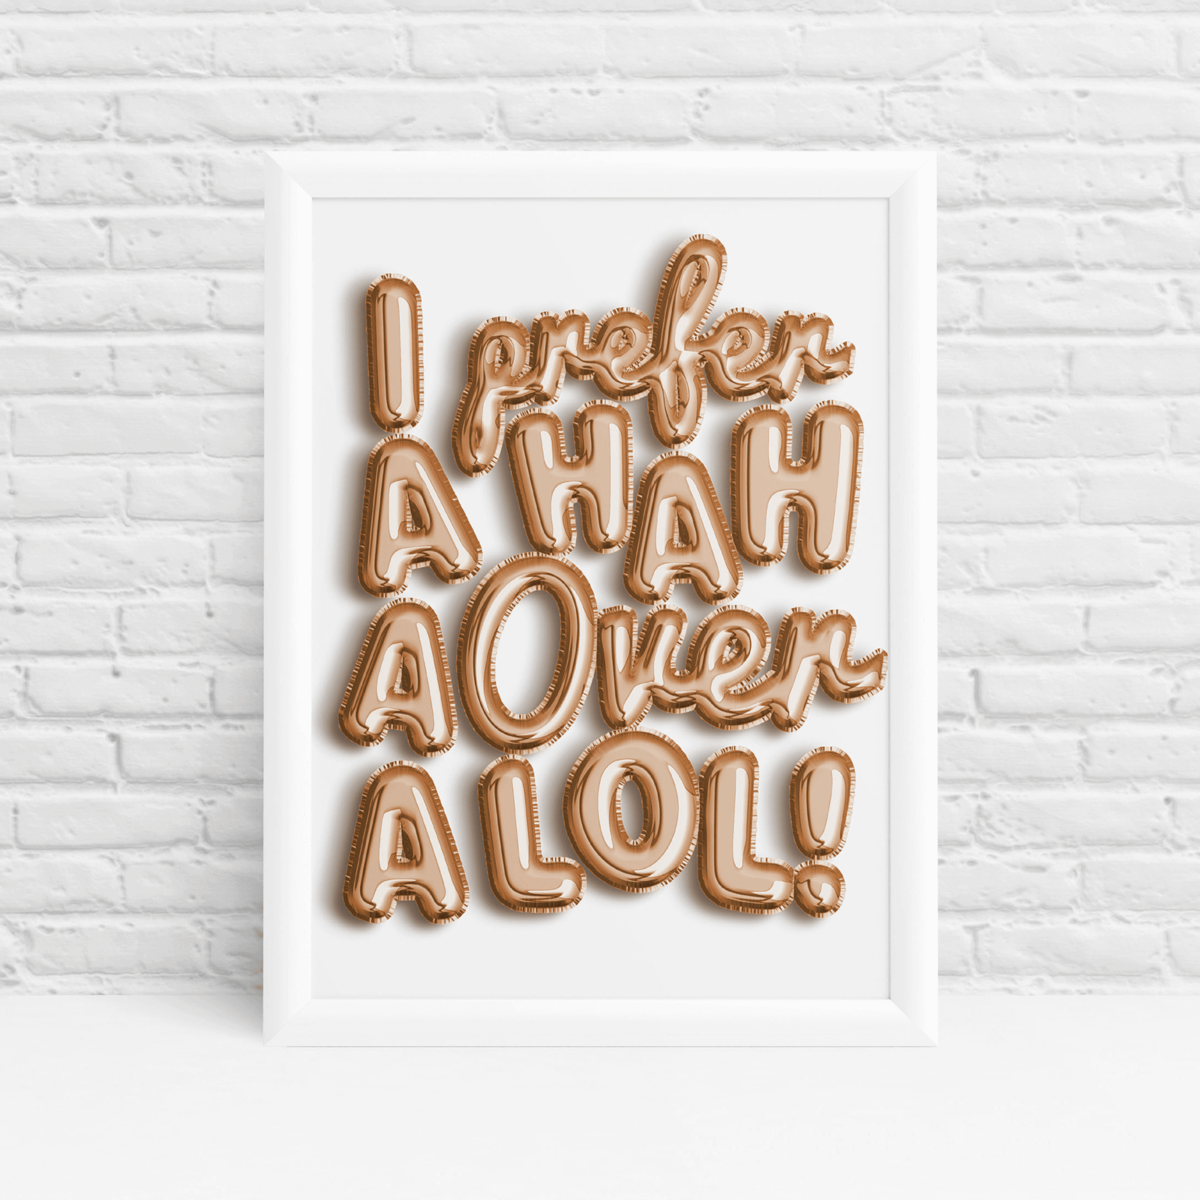 Metallic rose gold balloons 'I prefer a HAHA over a LOL' print by Ibbleobble®